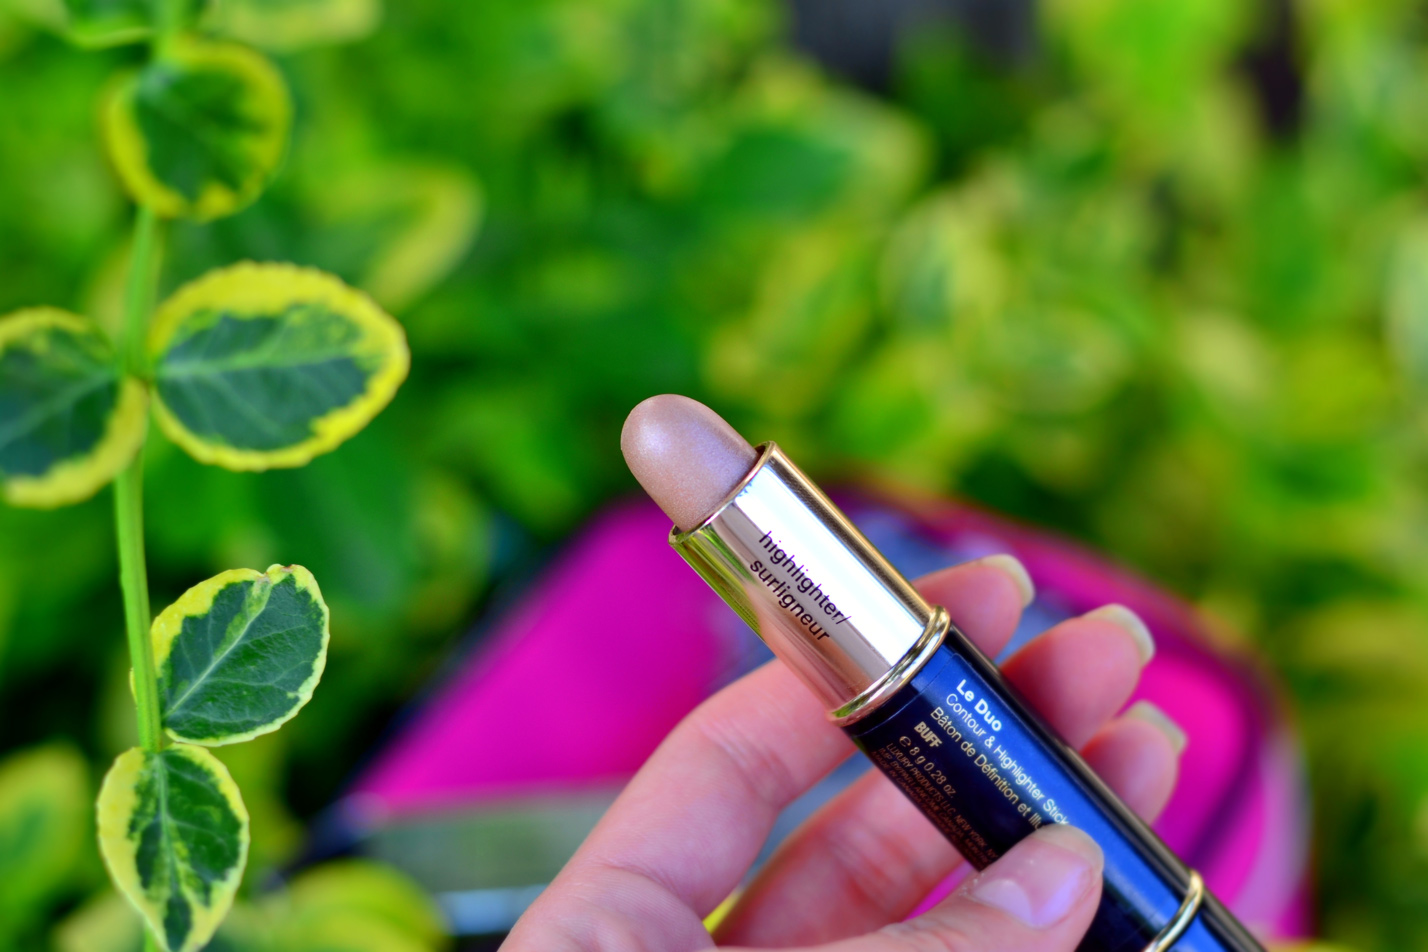 Lancome-Le-Duo-Highlighter